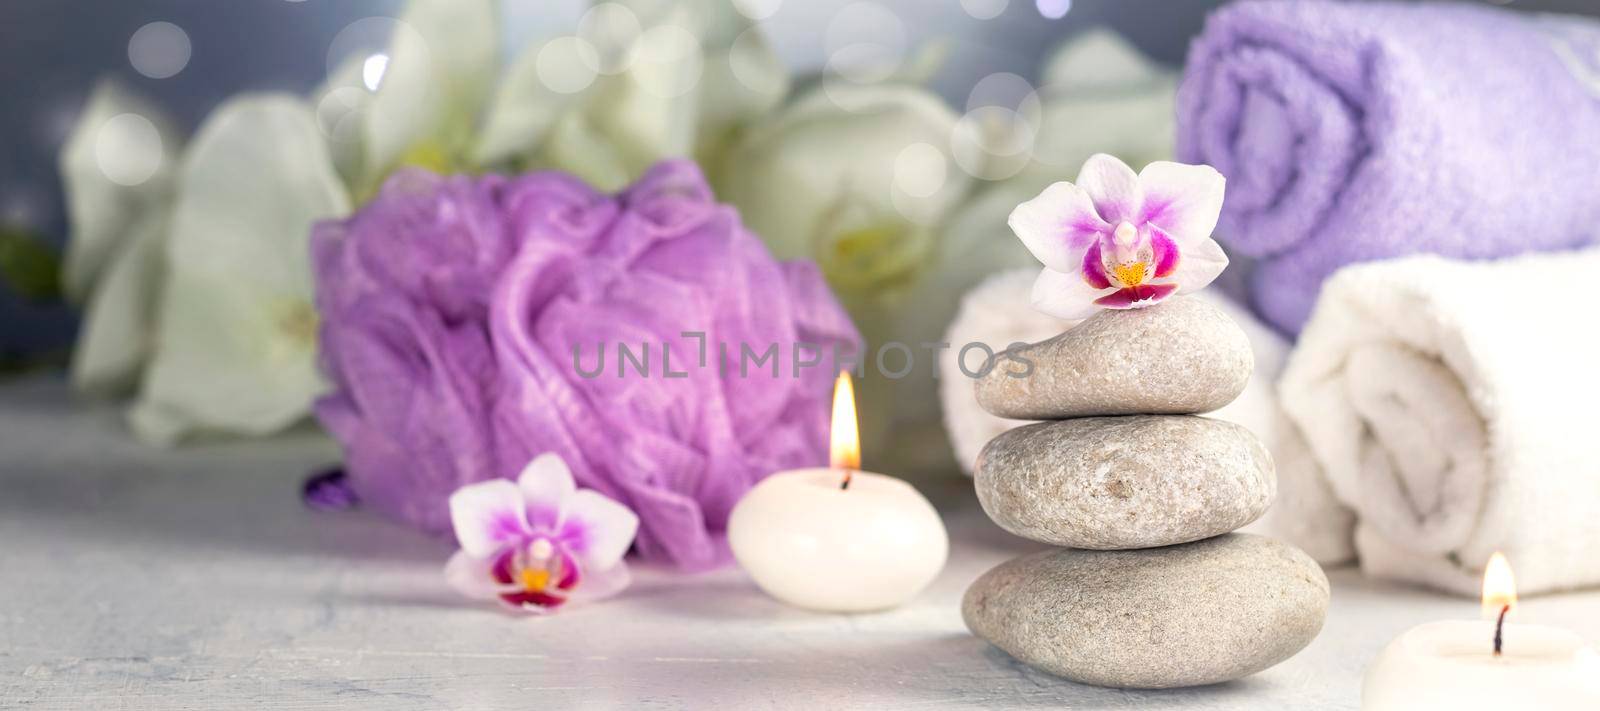 banner with massage stones, burning candles, rolled towels, flowers, abstract lights. Spa resort therapy composition in lilac colors Soft focus